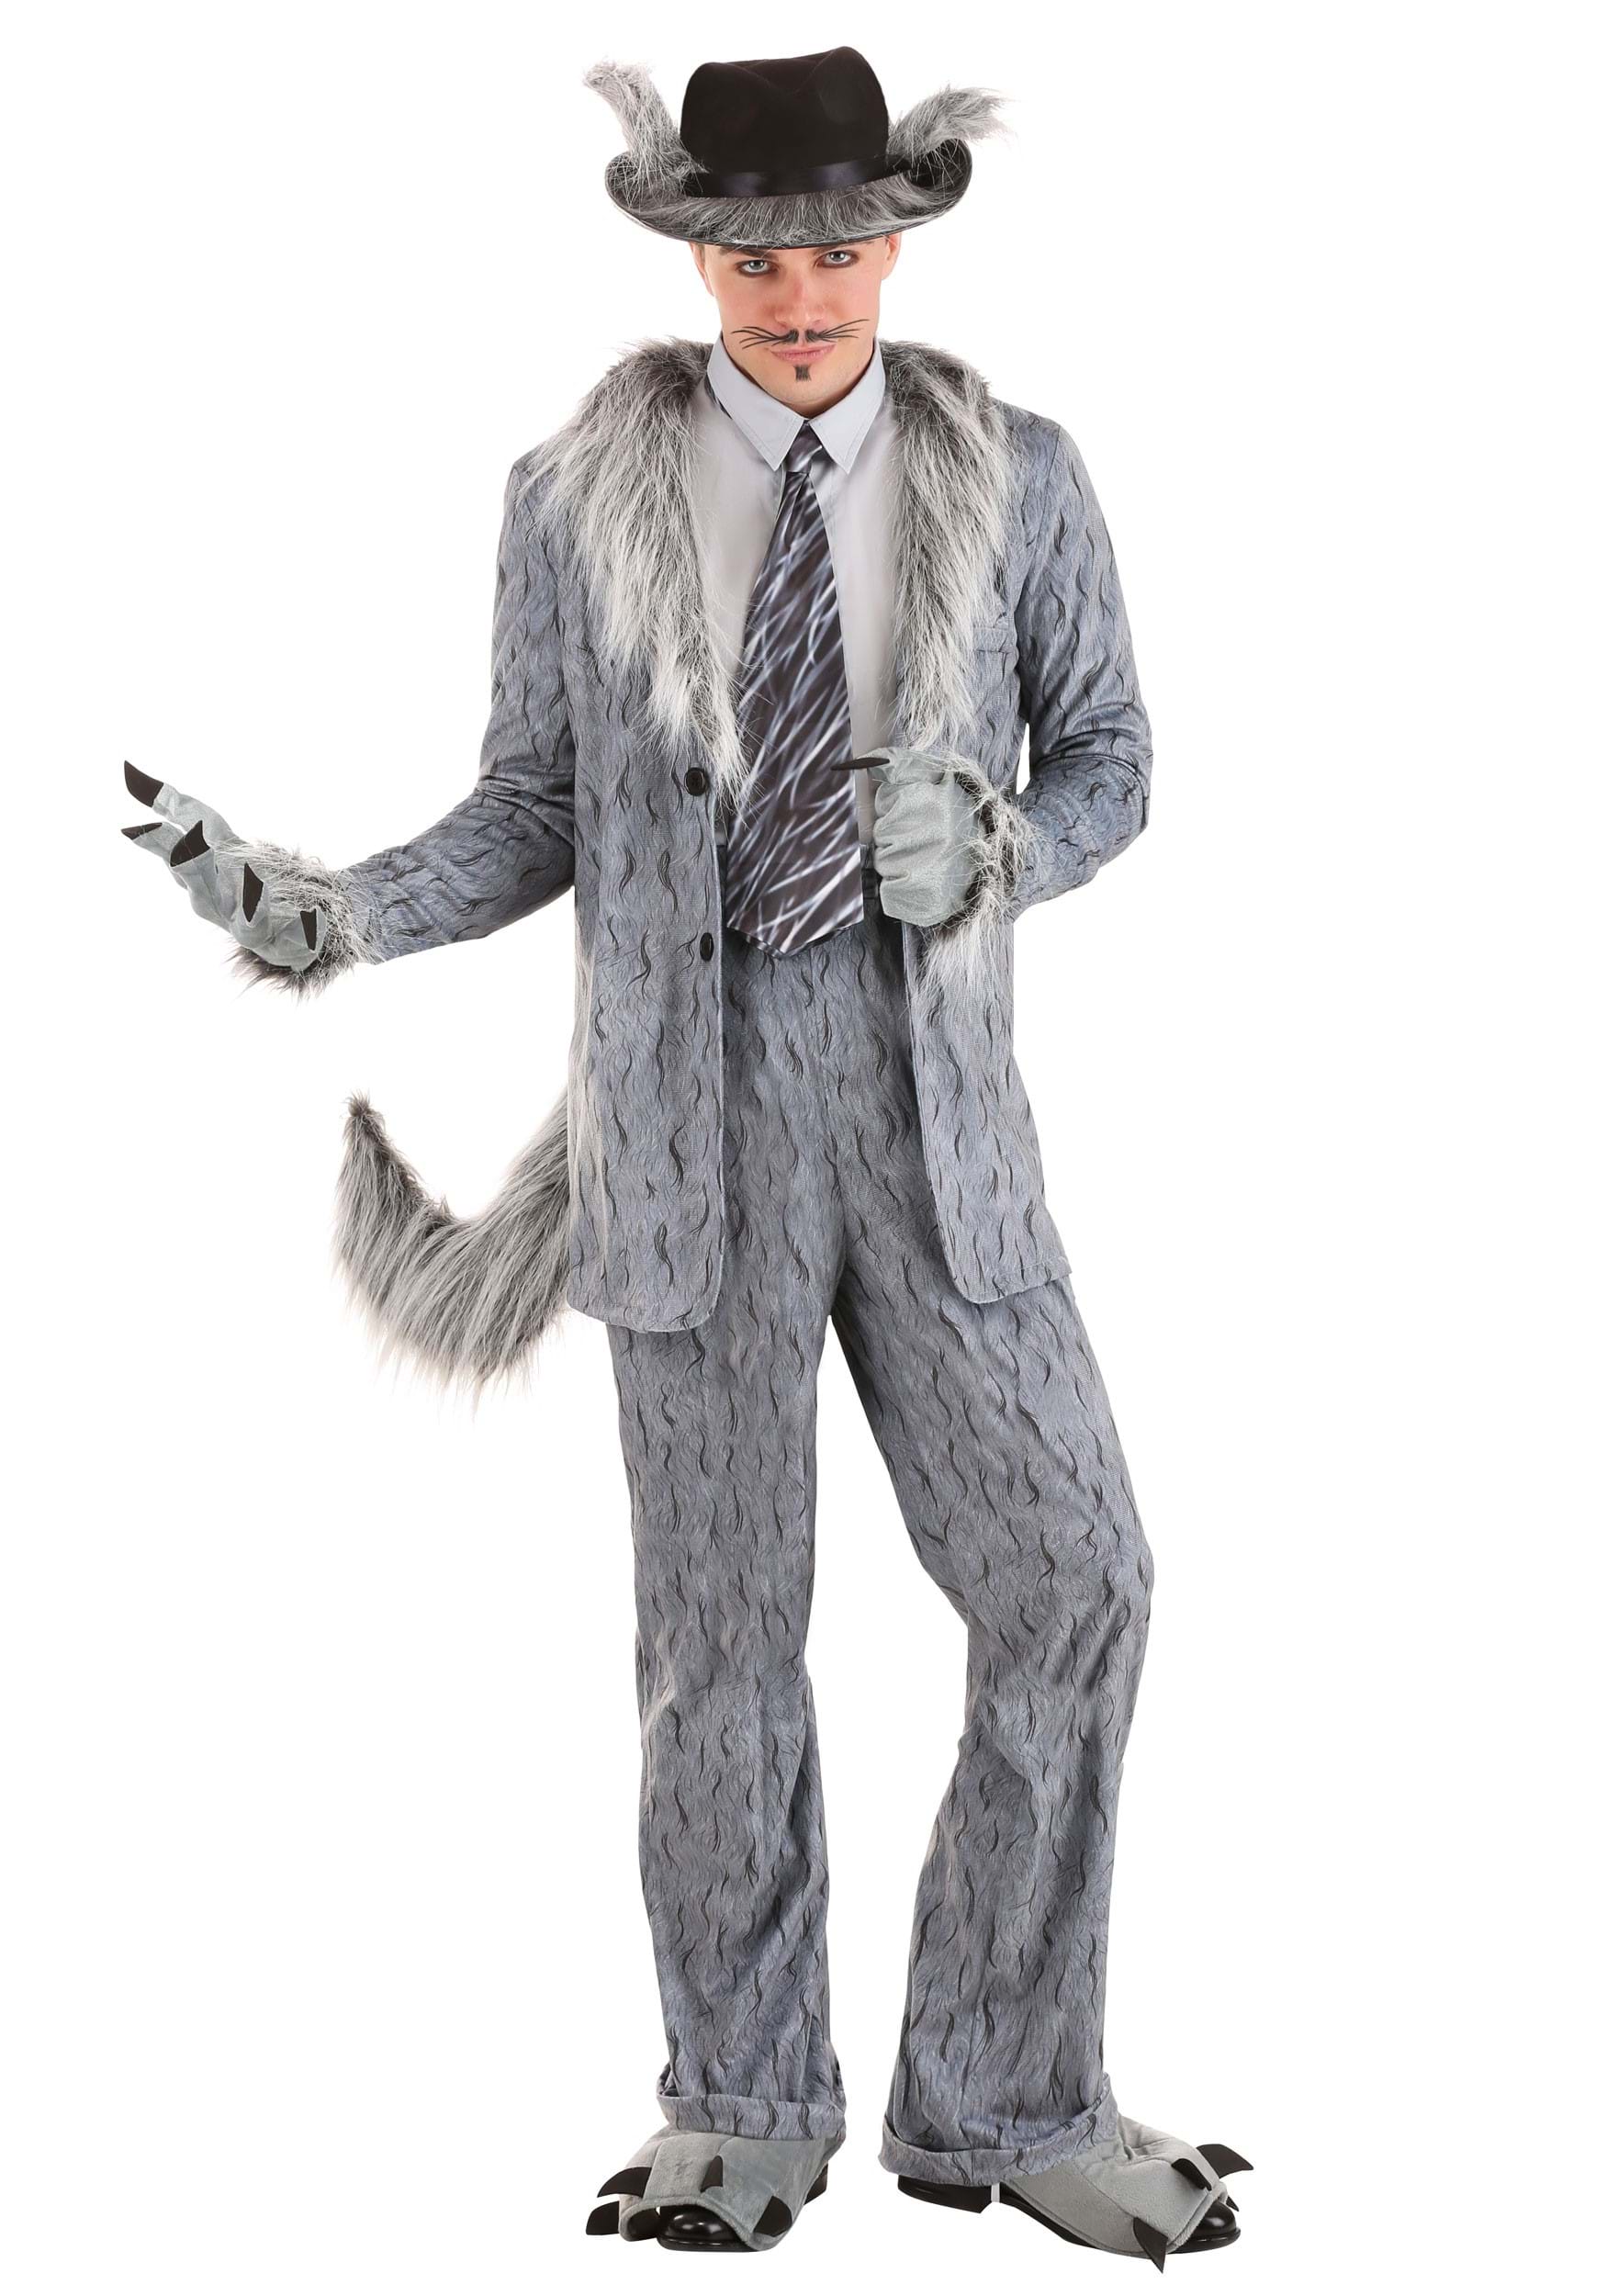 Photos - Fancy Dress WOLF FUN Costumes Woodsy Bad   Costume for Men Black/Gray FU 